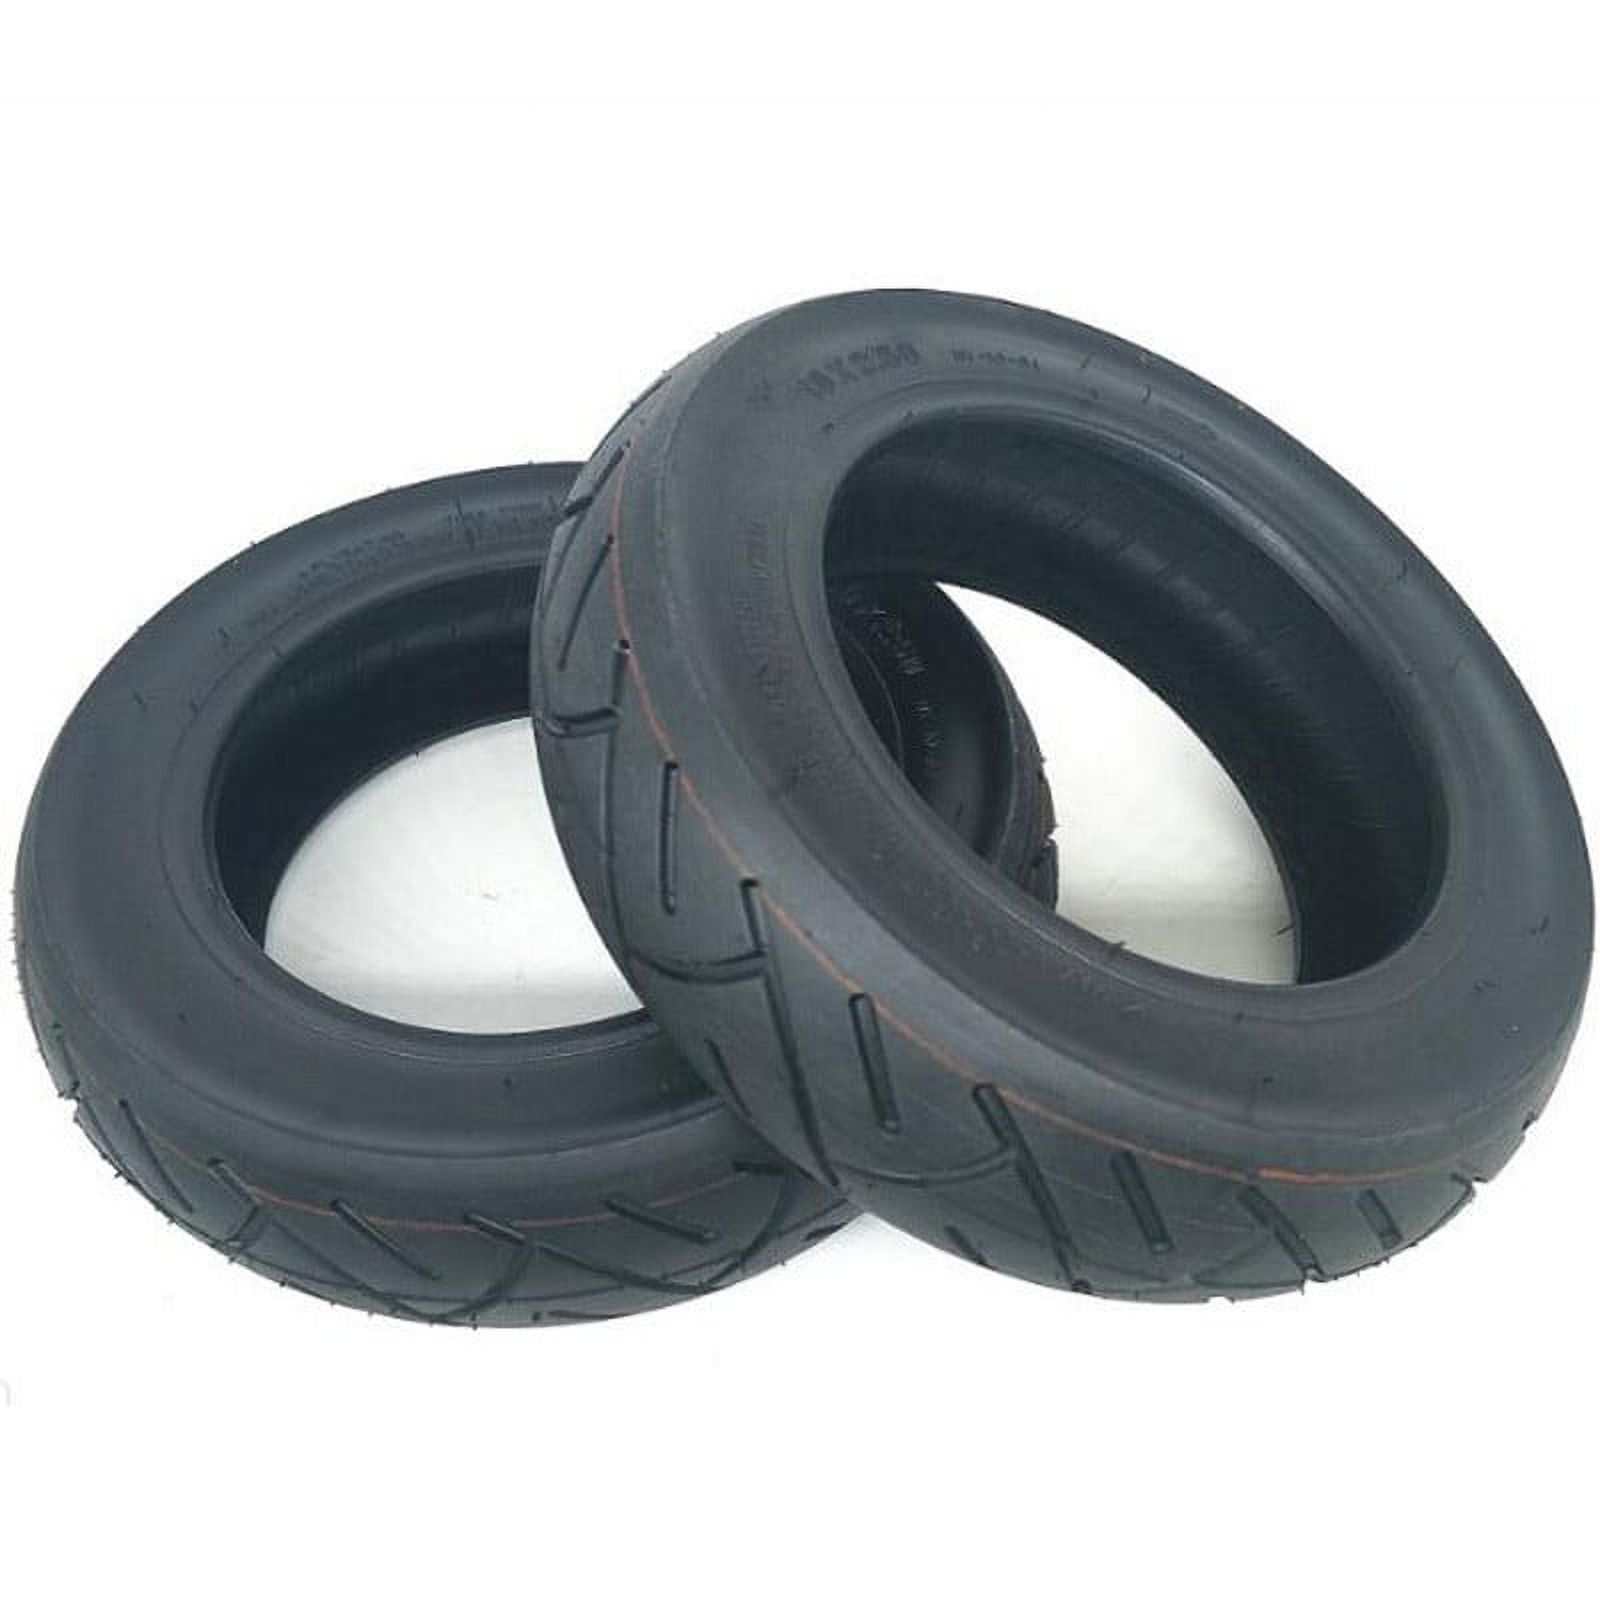 Electric Scooter Tire Rubber 10X2.50 Inner Tube Spare Replacement Parts - image 3 of 7